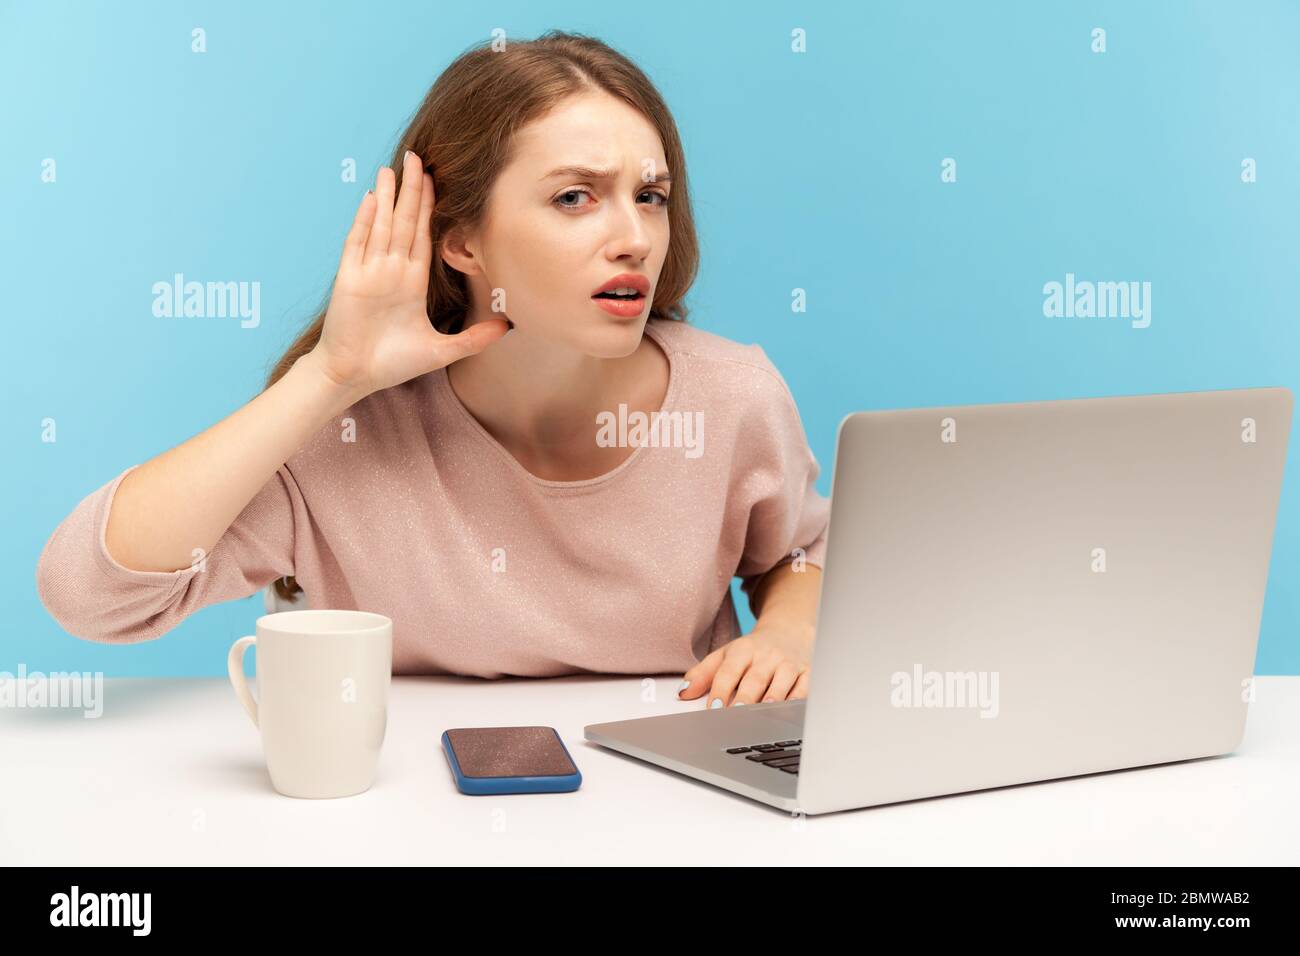 What? I can't hear you! Female office worker sitting at desk with laptop and keeping hand at her head, listening carefully intently to secret gossip. Stock Photo